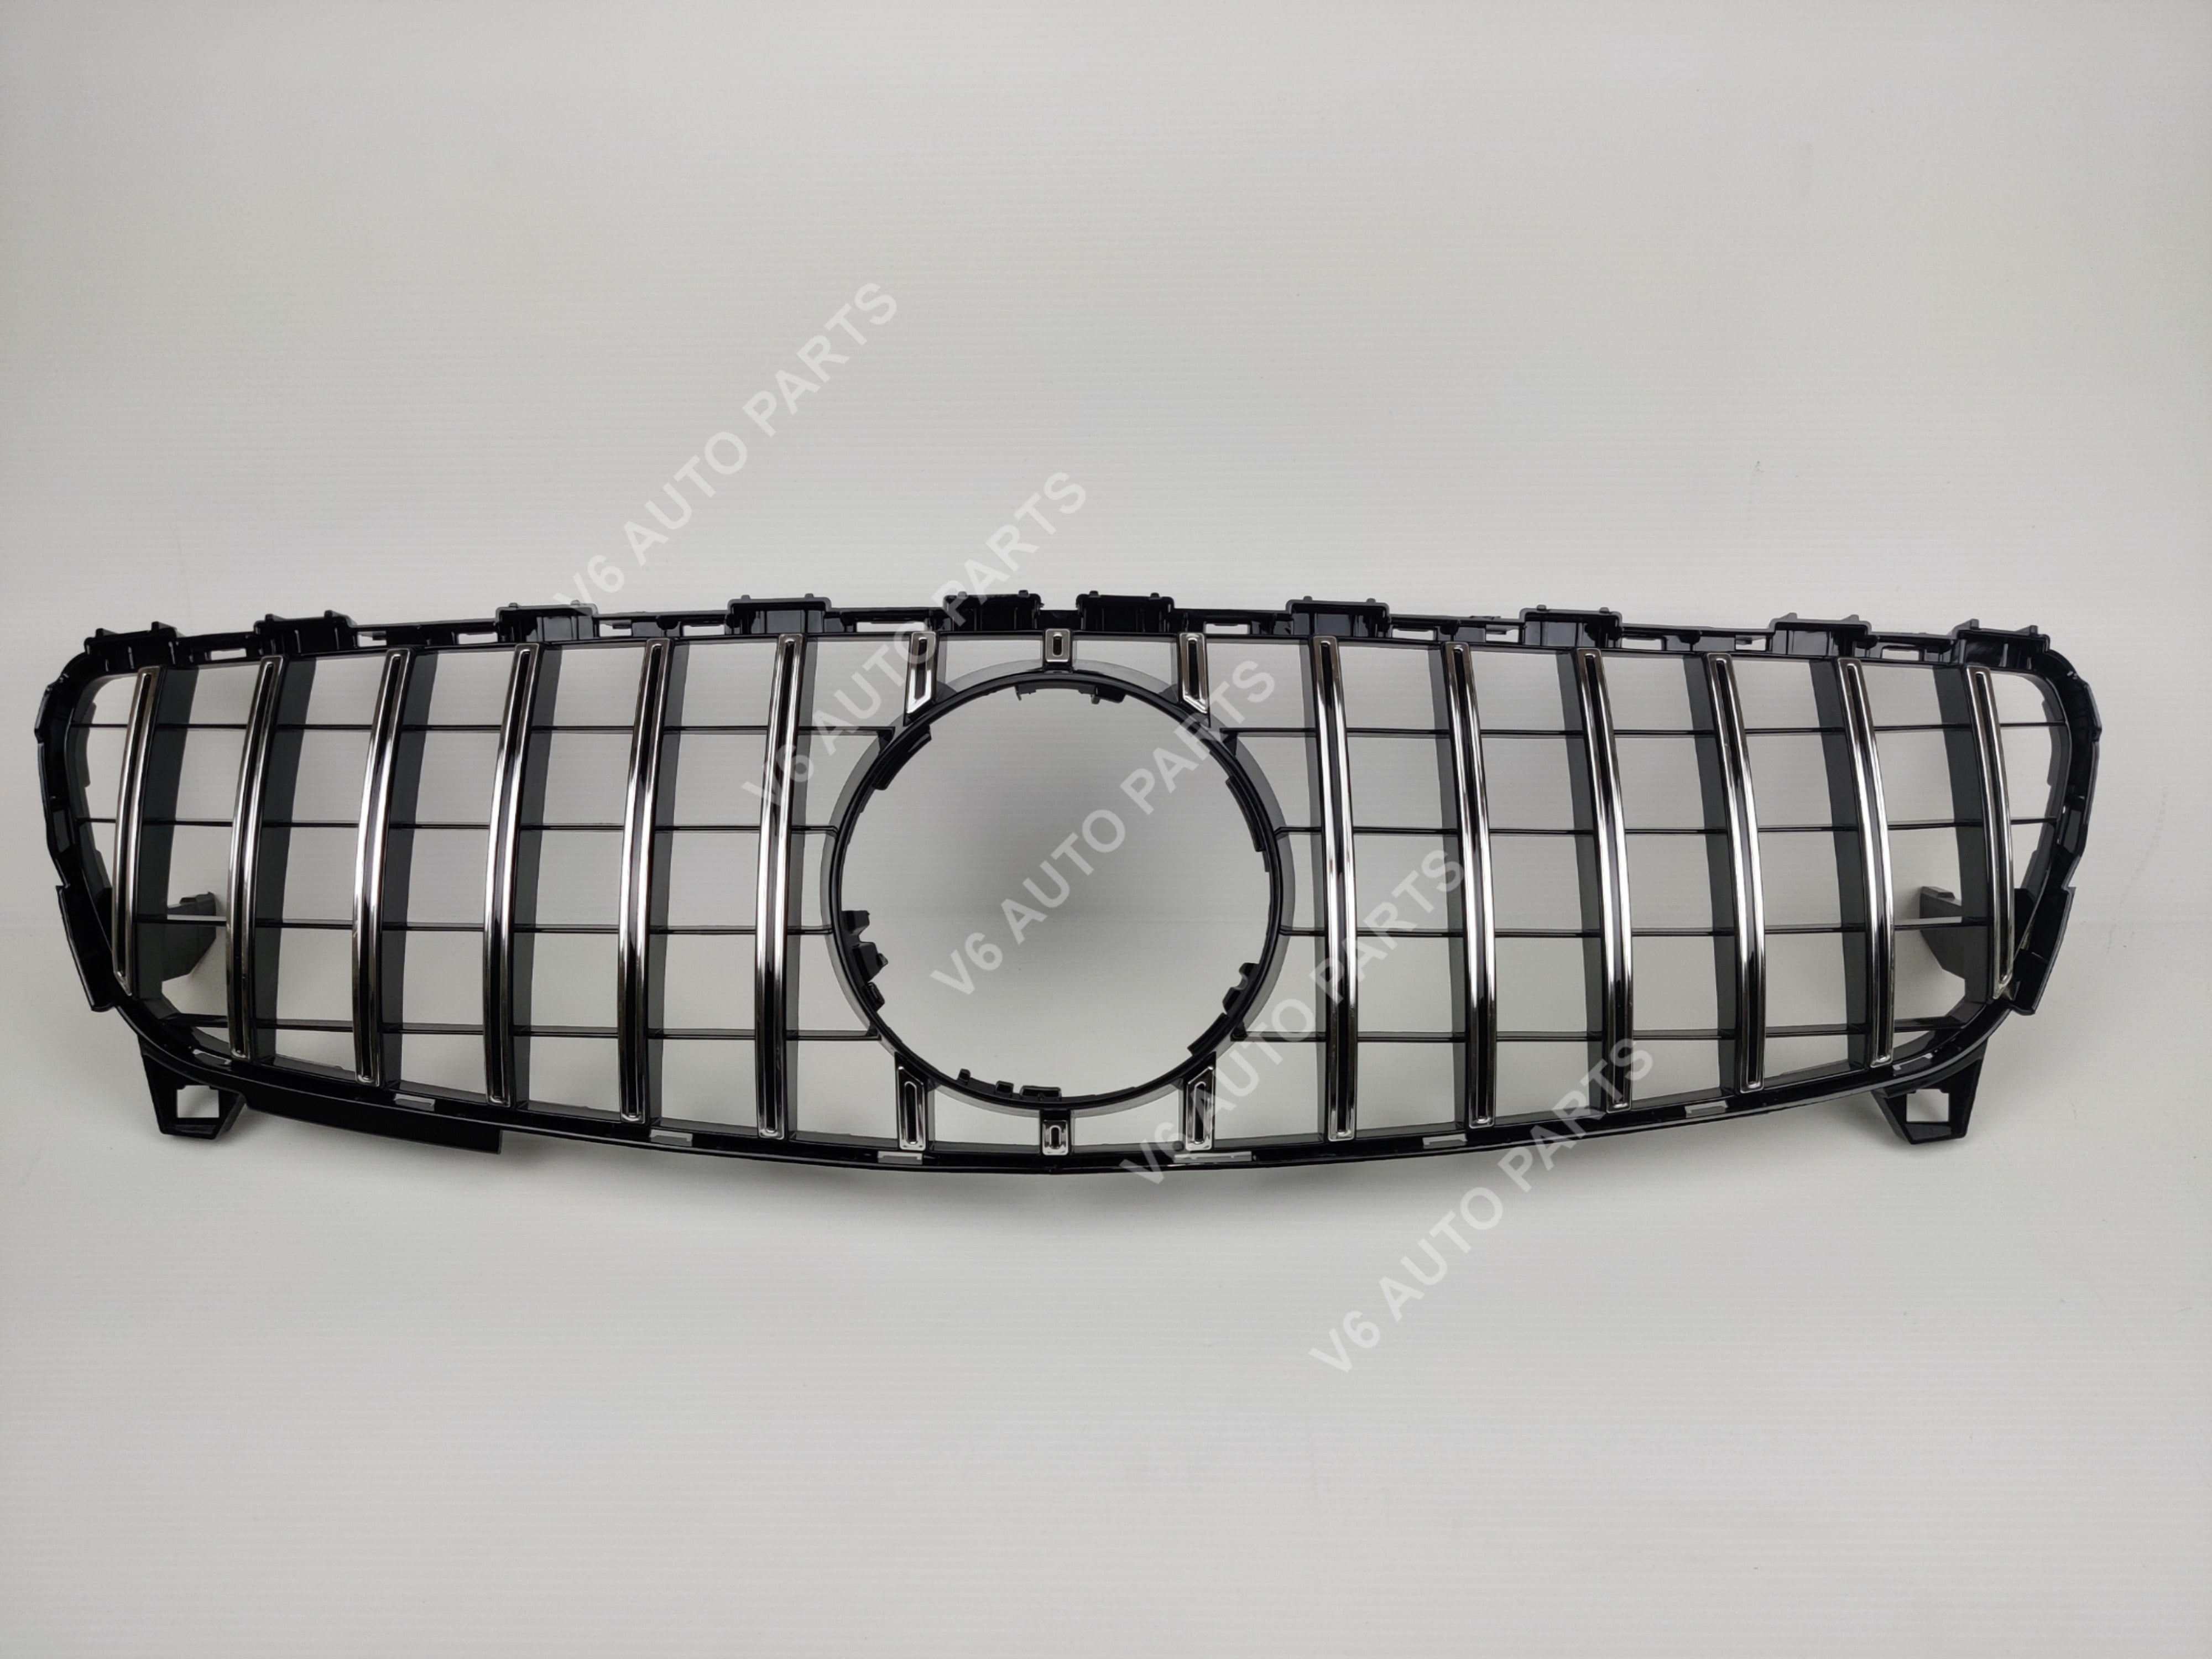 For Mercedes A-Class W176 A160 A180 Front Radiator Grille Panamericana 2015-2018